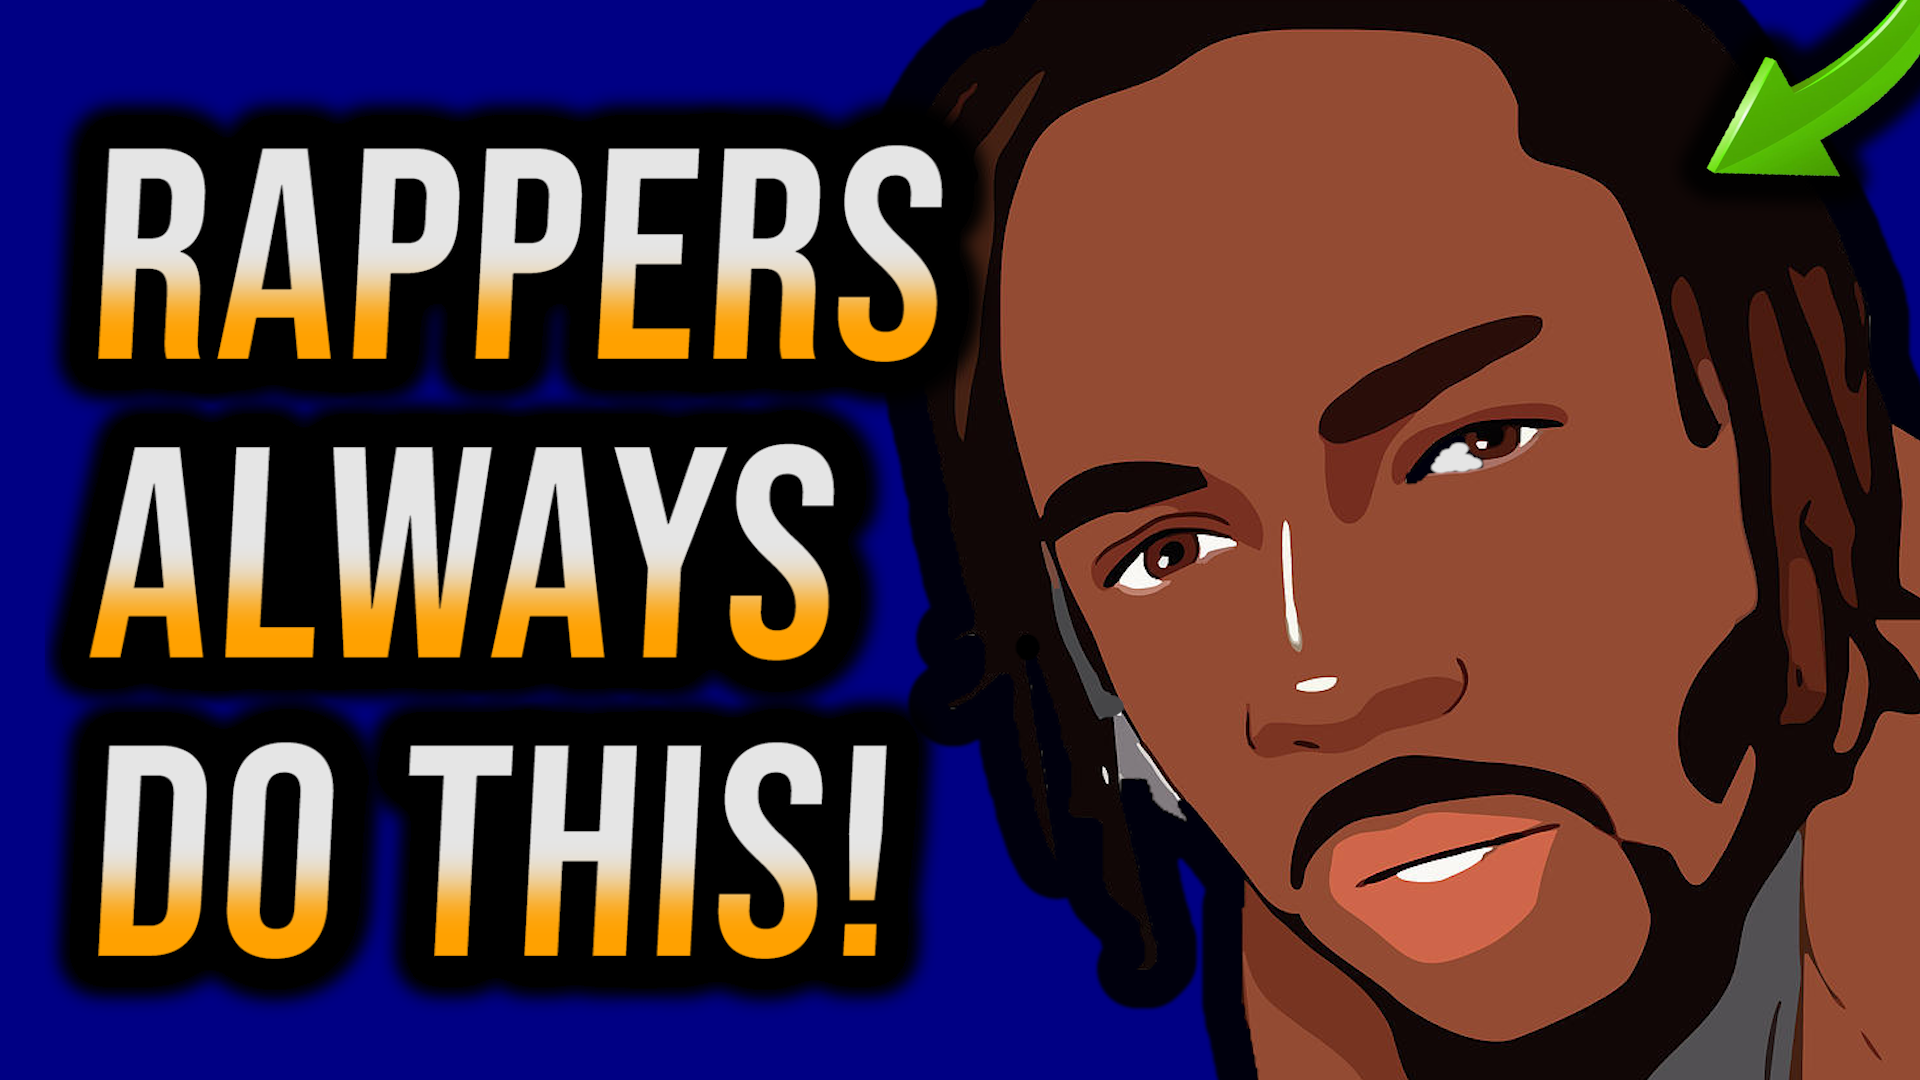 How To Be A Better Rapper In 5 Steps